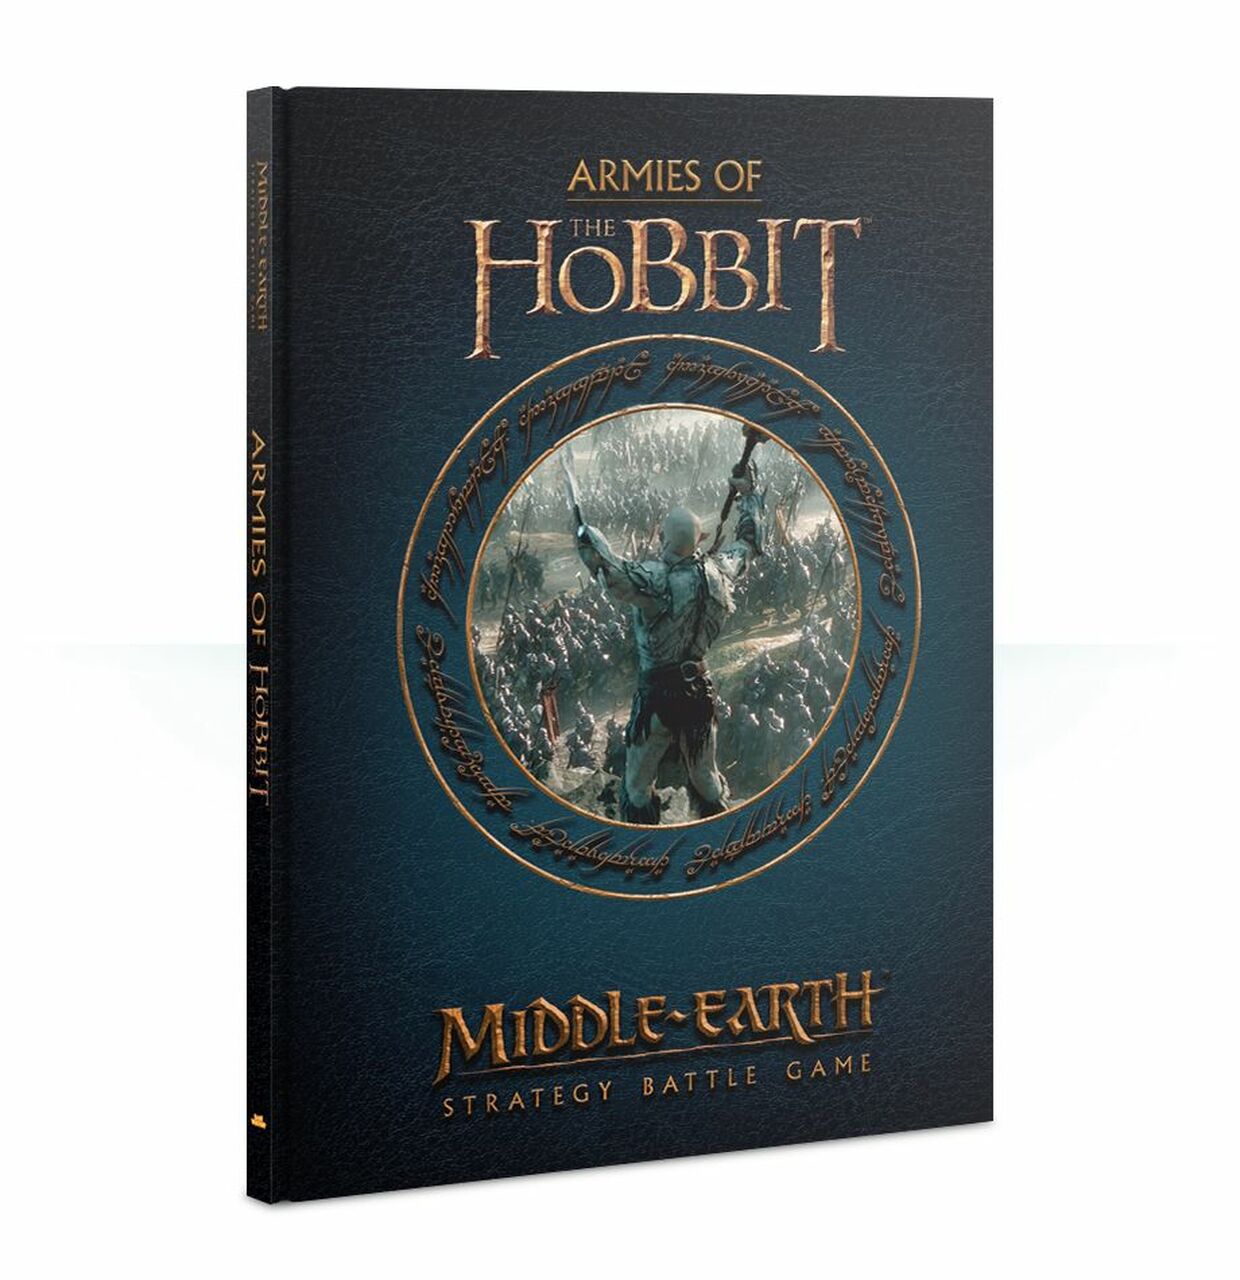 Middle-Earth: Strategy Battle Game - Armies of The Hobbit